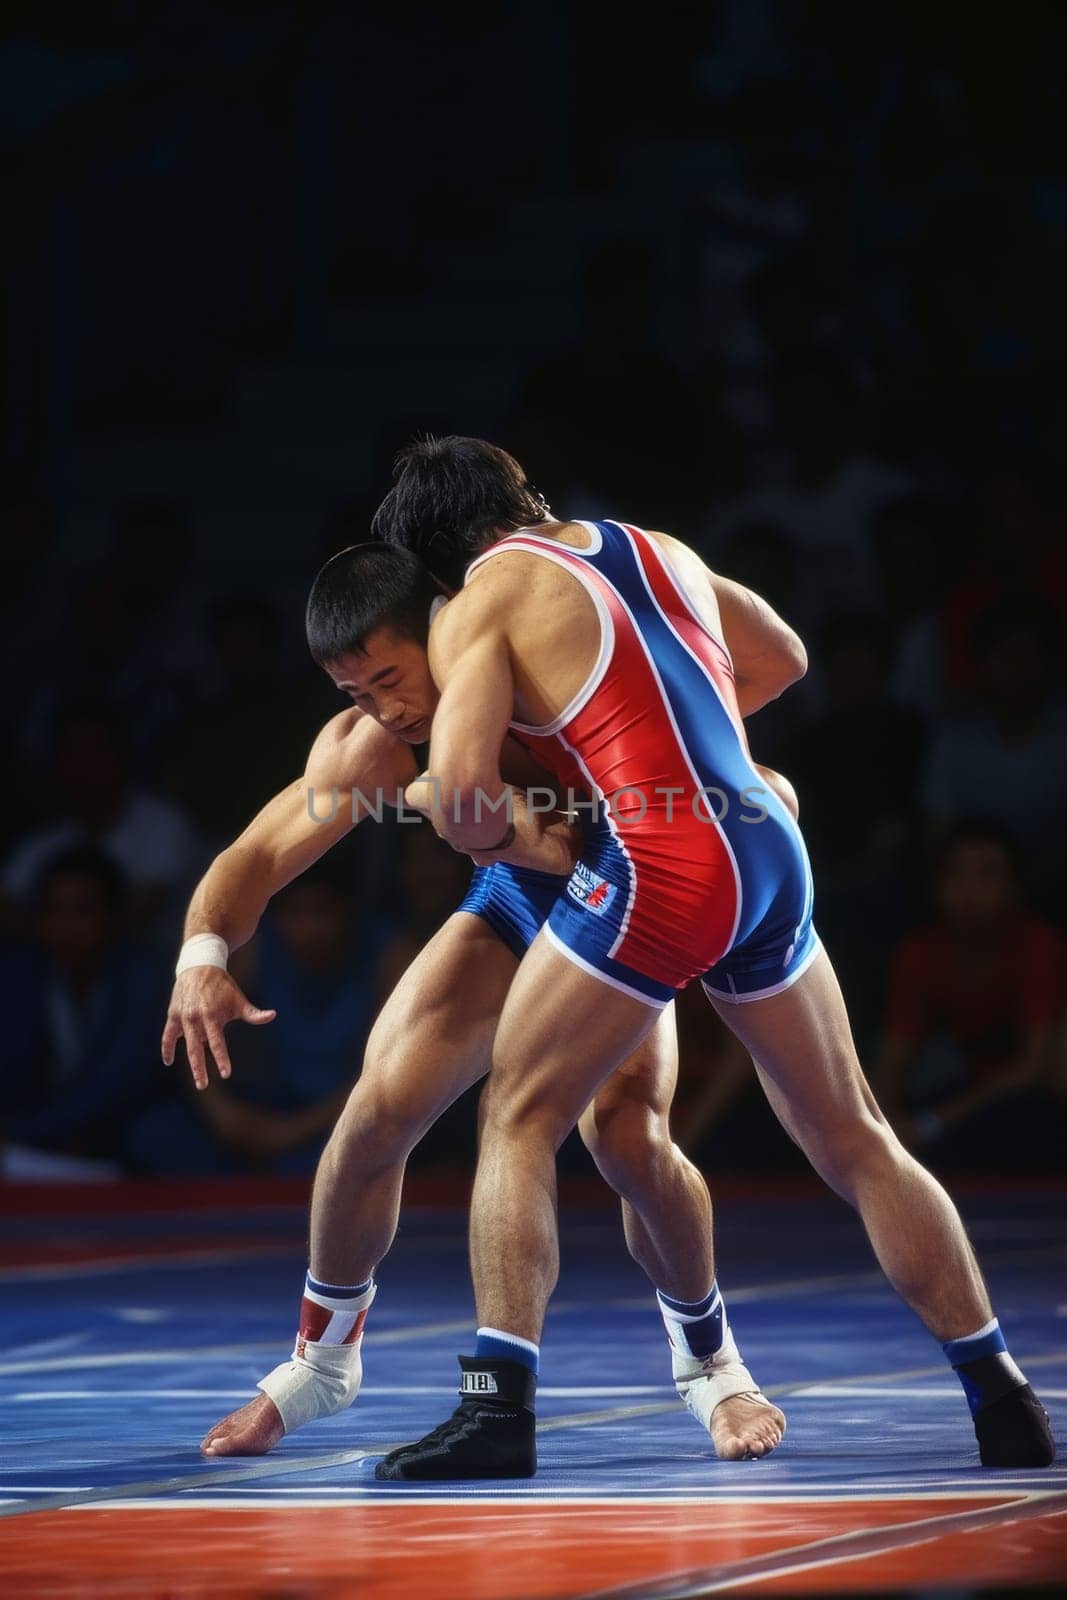 Two male wrestlers in a gripping contest, showcasing strength and skill in a crowded arena